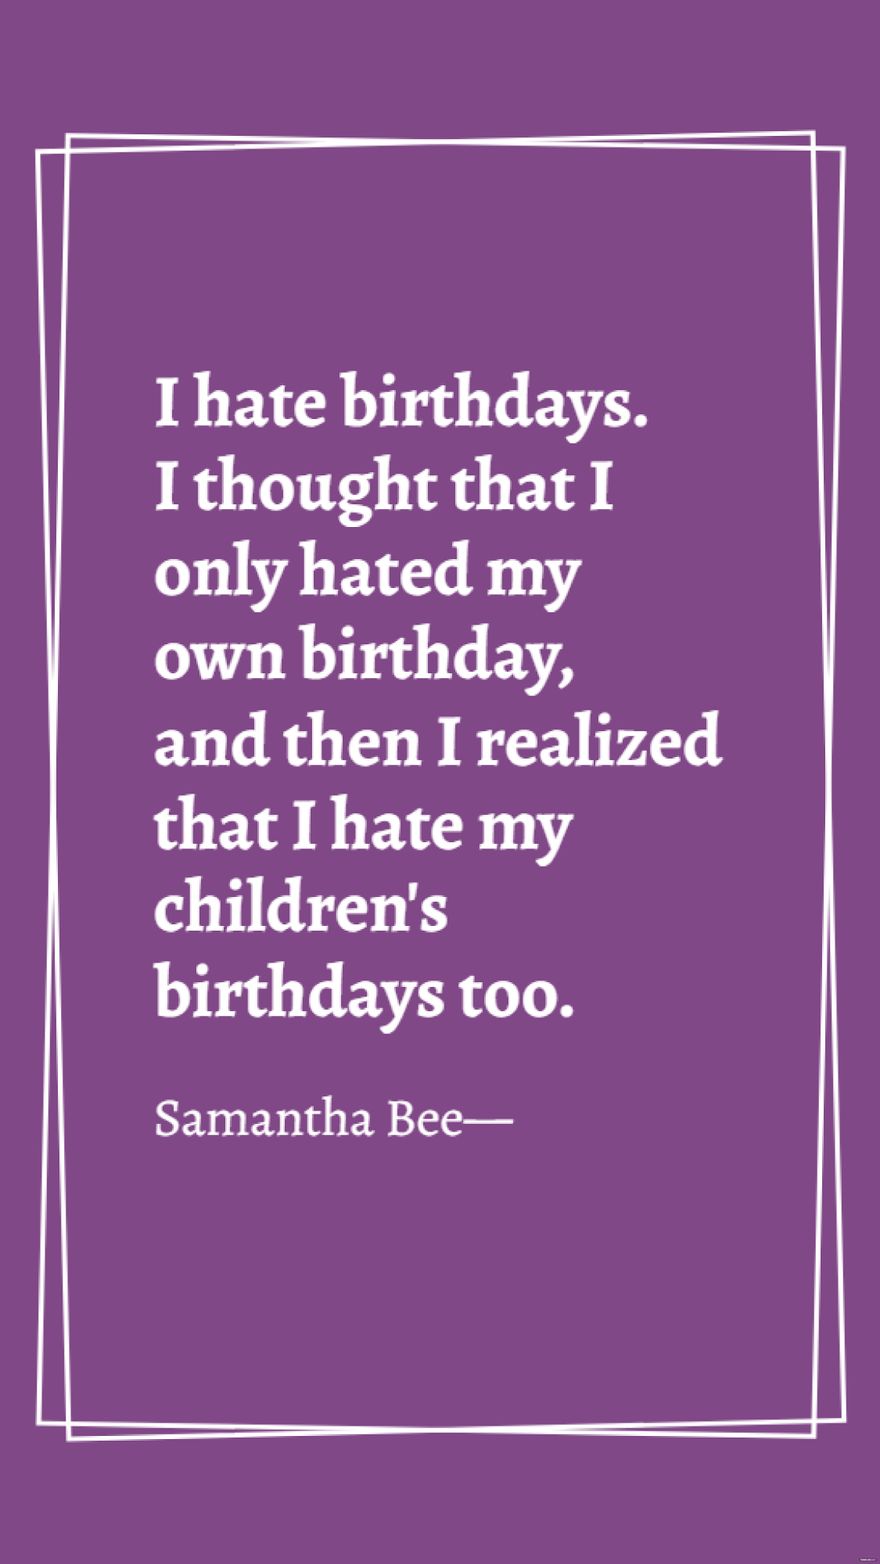 Samantha Bee - I hate birthdays. I thought that I only hated my own birthday, and then I realized that I hate my children's birthdays too. in JPG